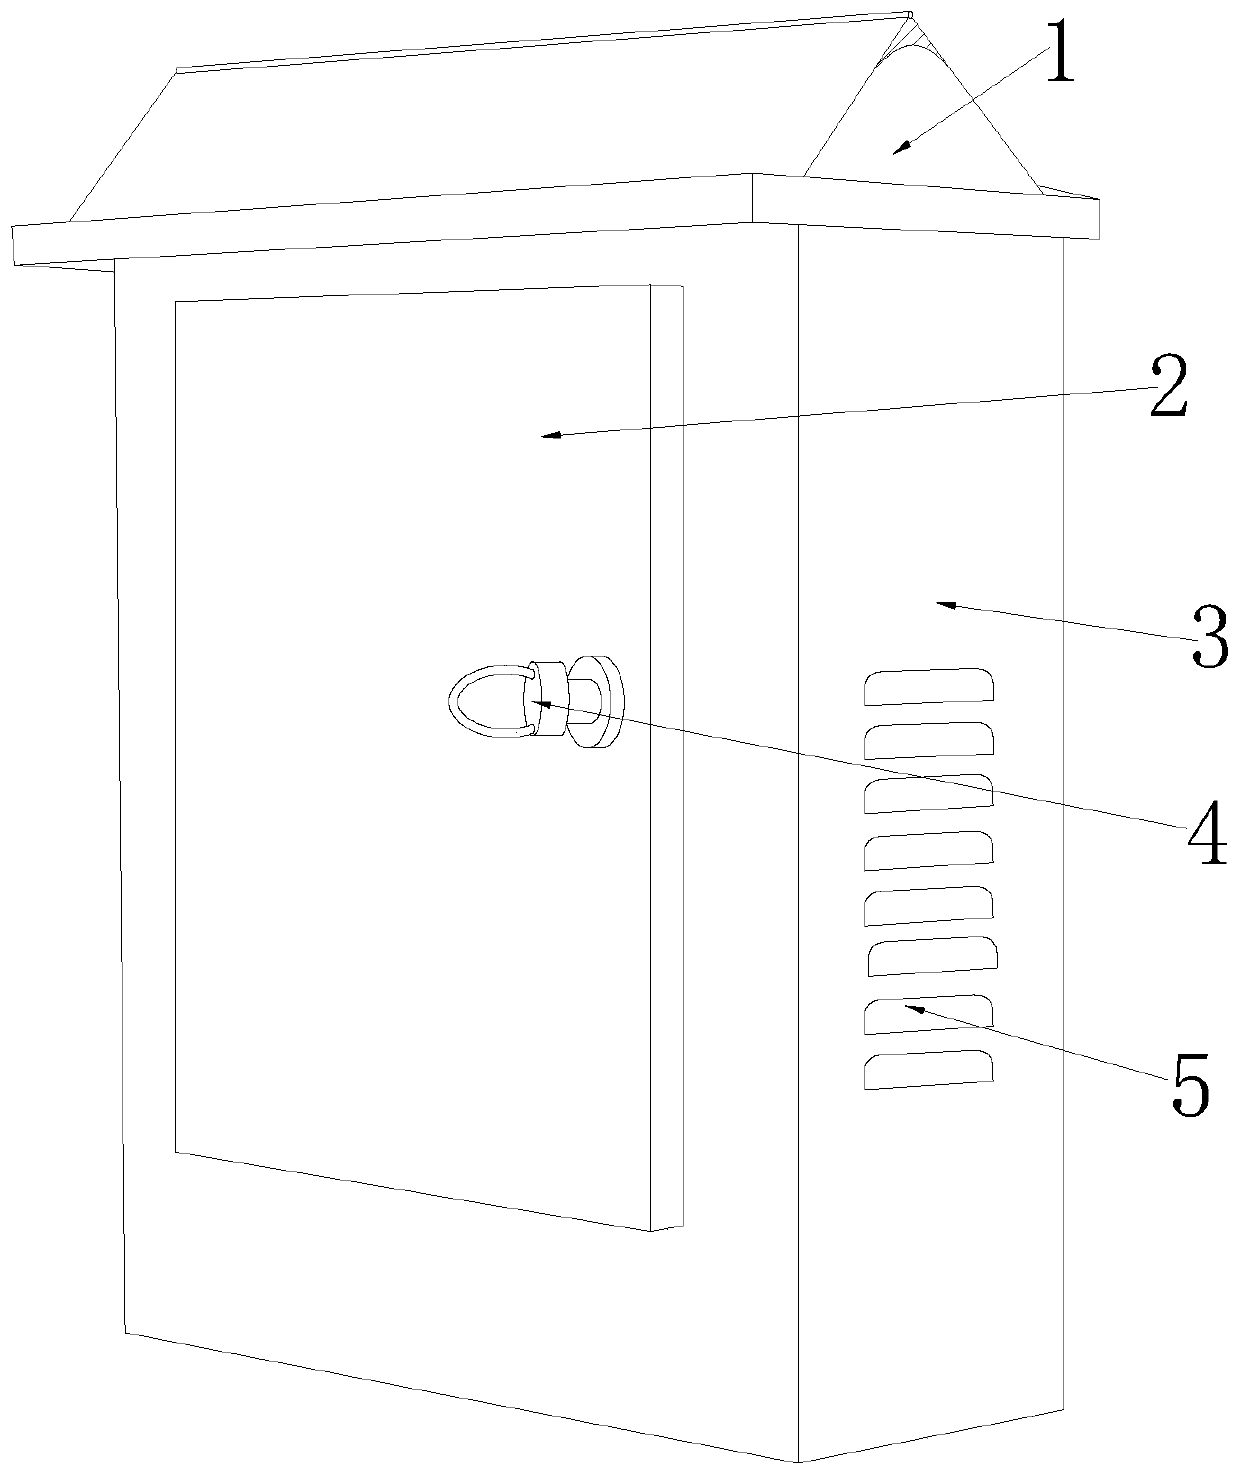 Power box rainproof device for changing ceiling height by pulling to open/close heat dissipation port